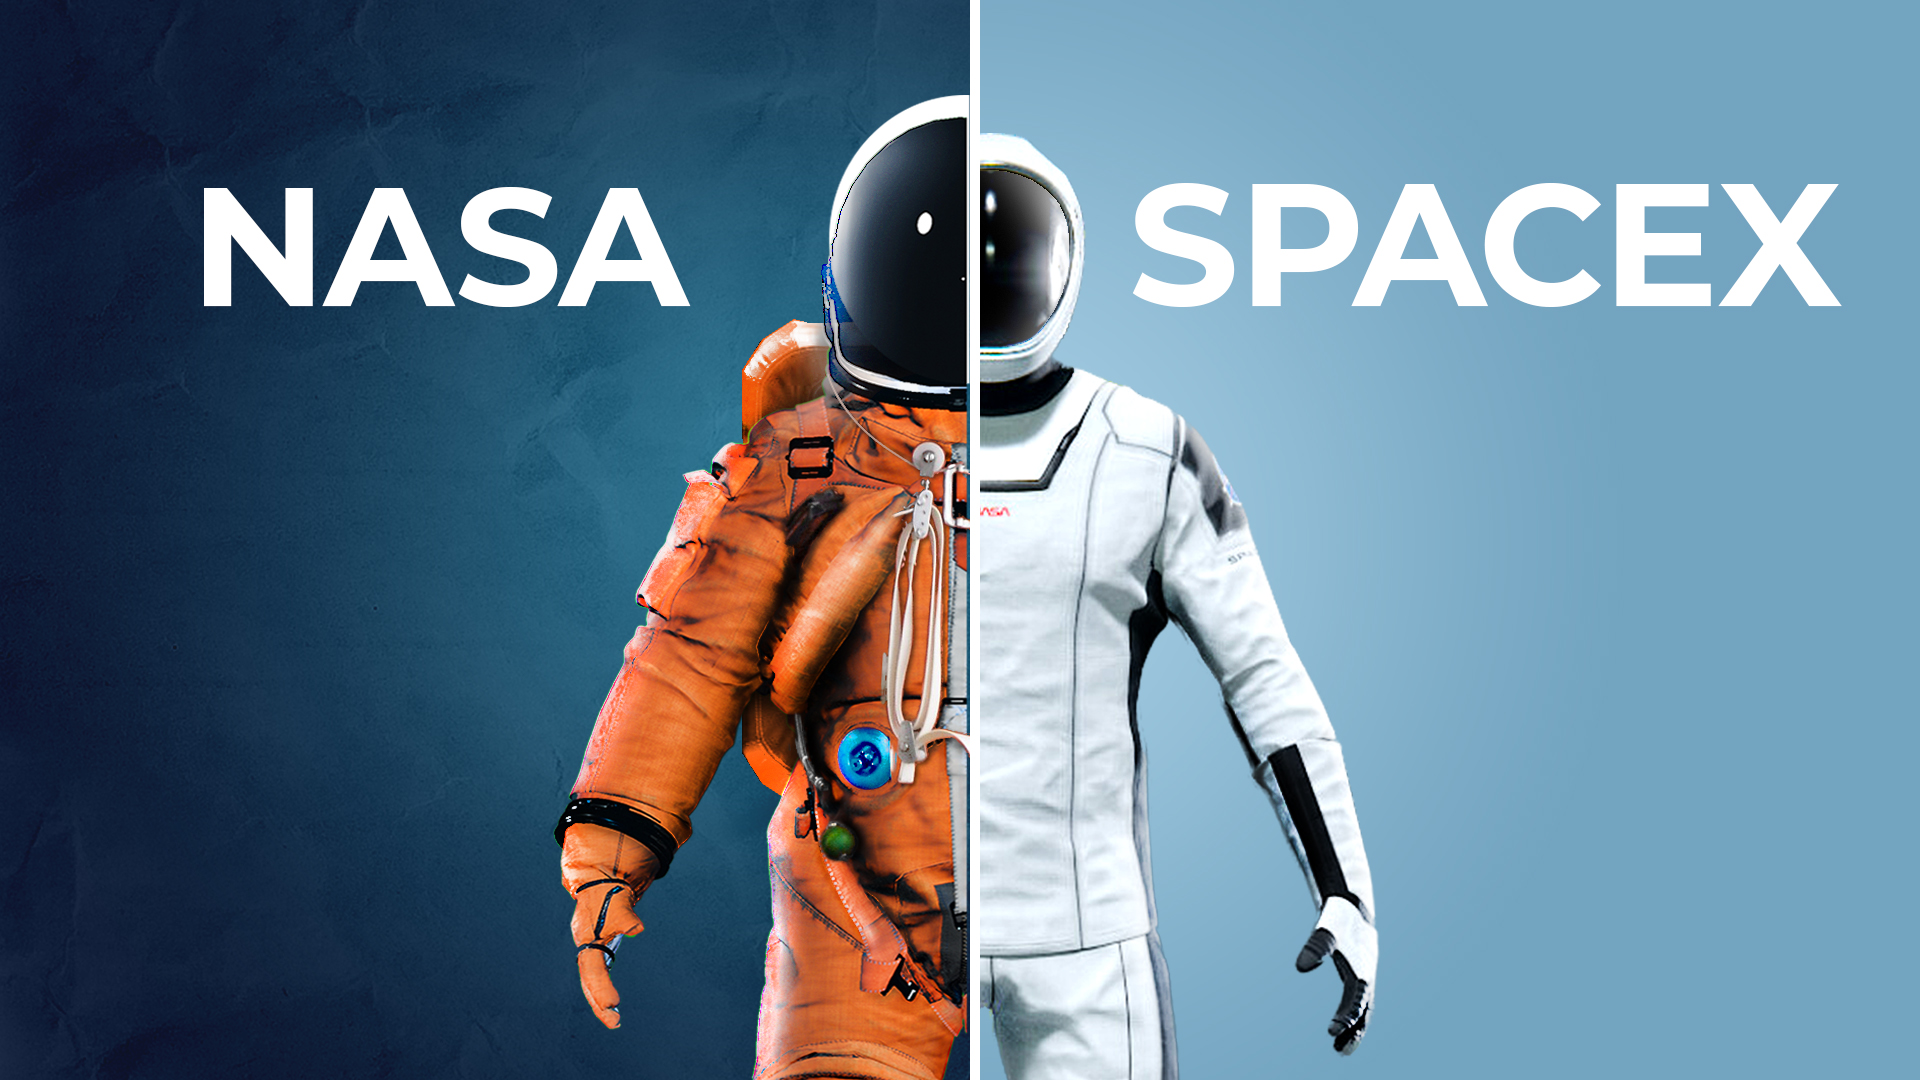 Space Shuttle ACES suits next to SpaceX's IVA suit